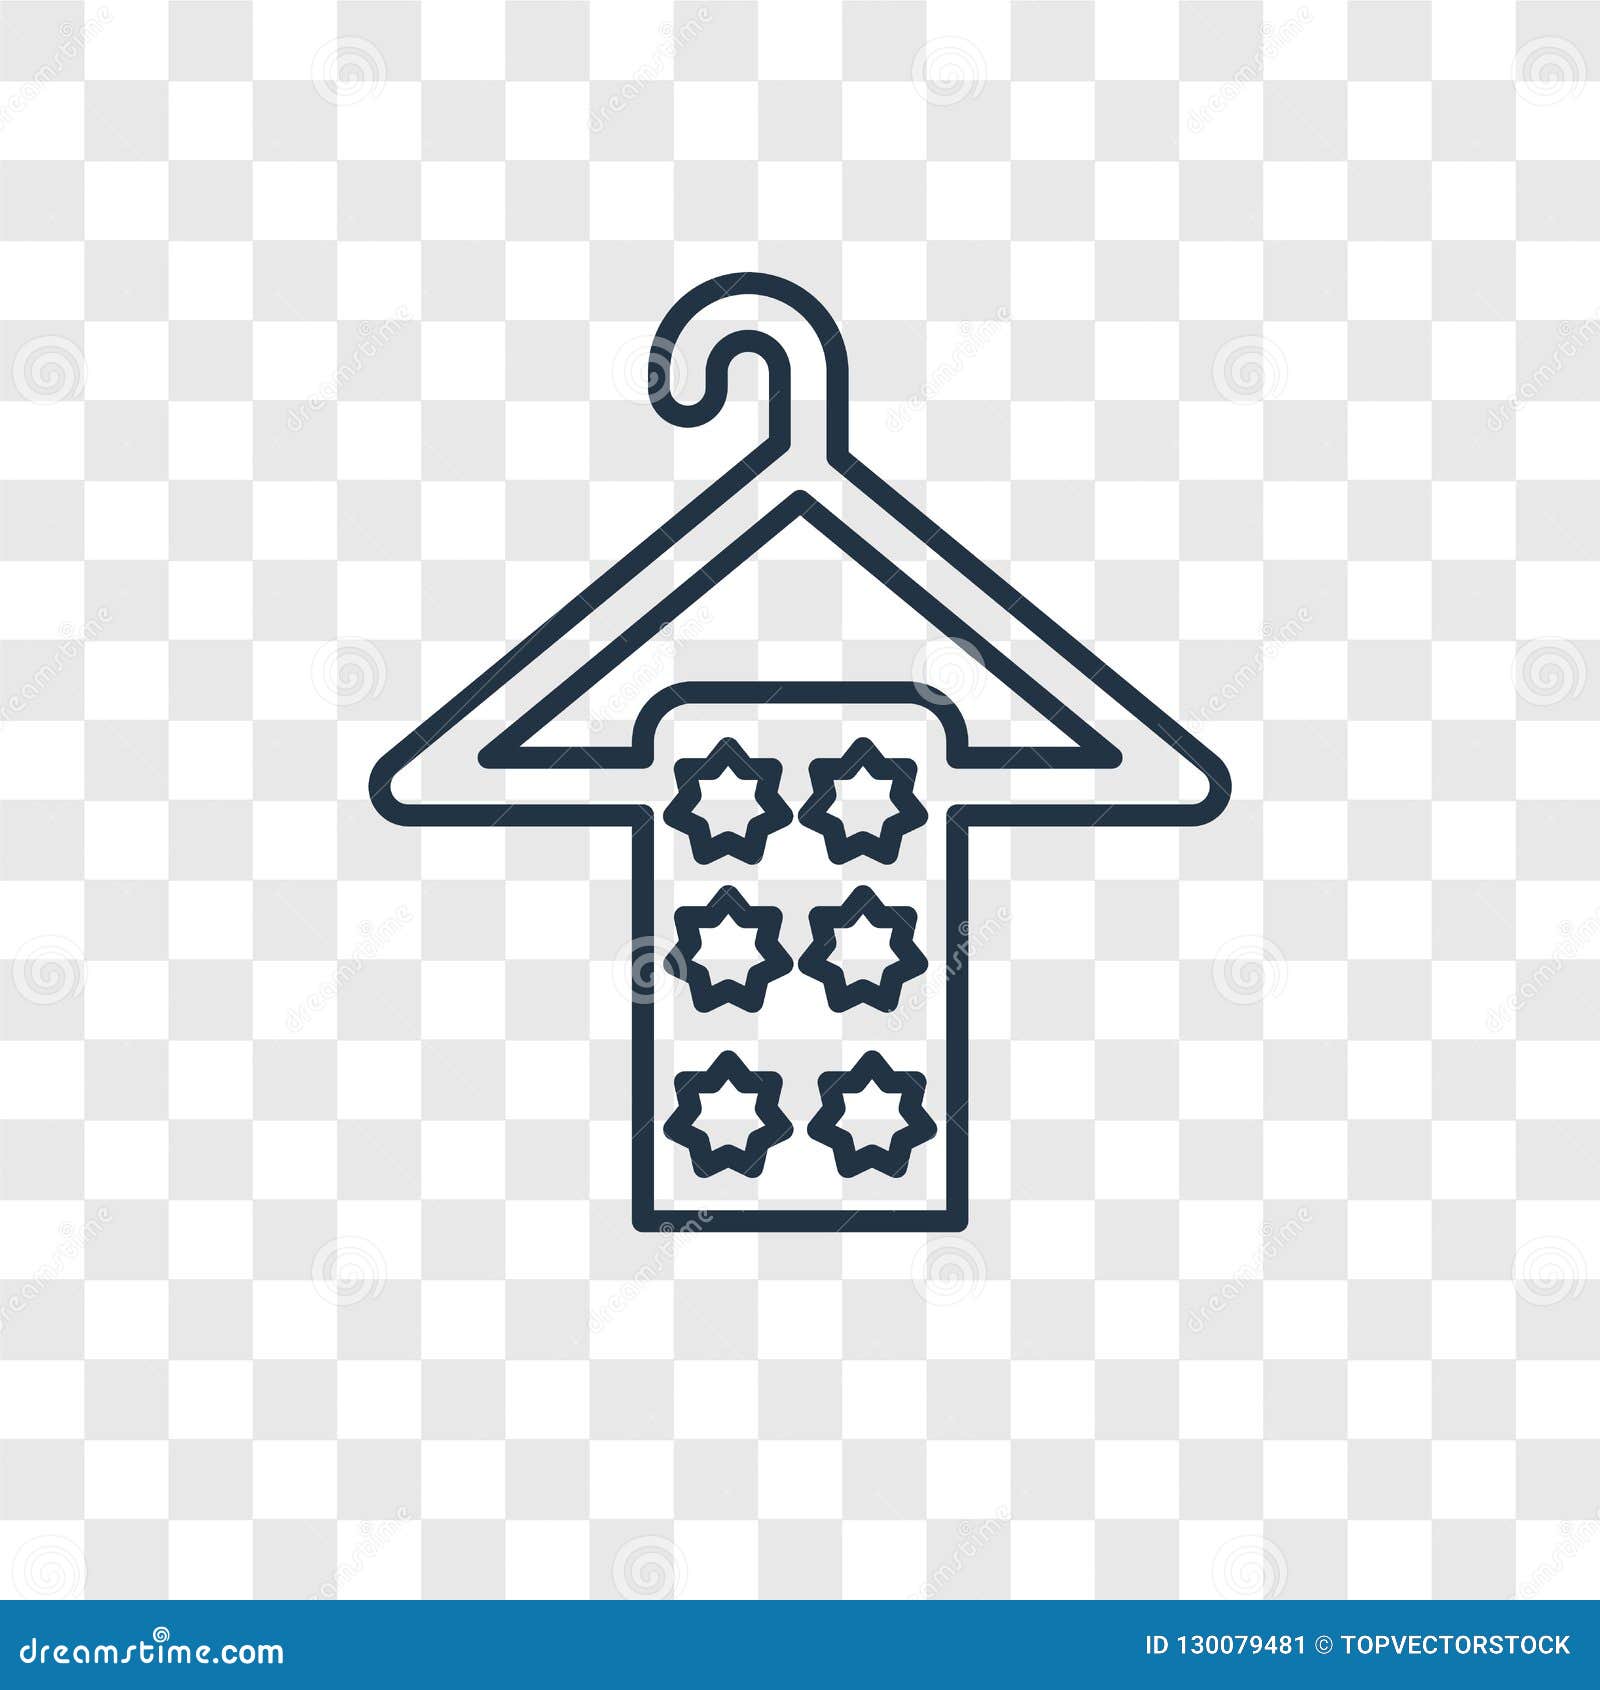 Wiping Towel On A Hanger Concept Vector  Linear Icon 